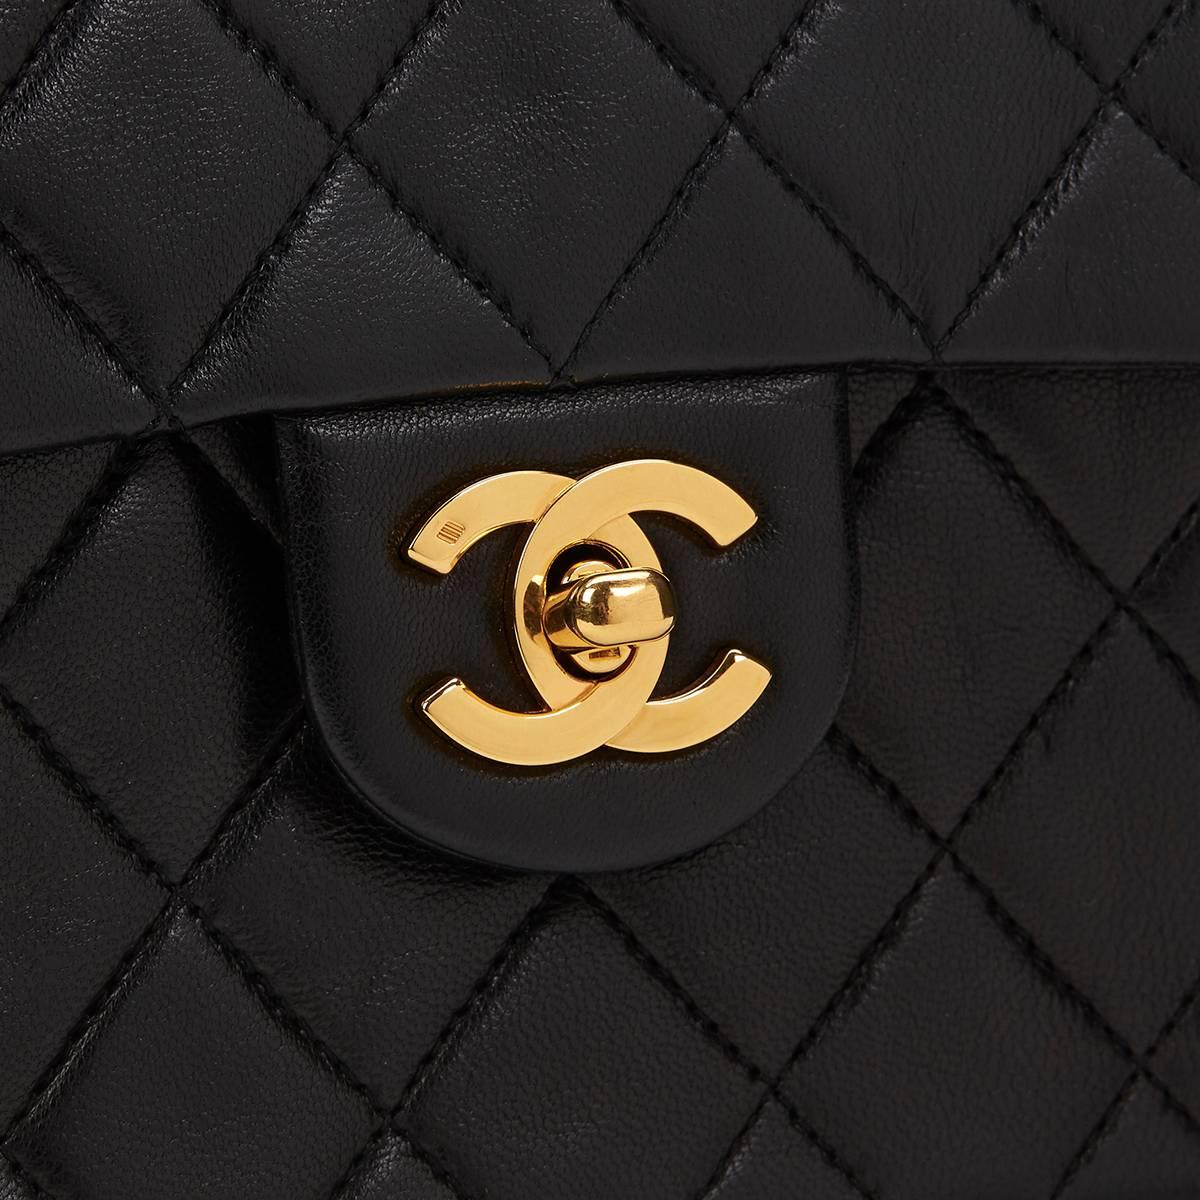 1980s Chanel Black Quilted Lambskin Vintage Mini Flap Bag 4